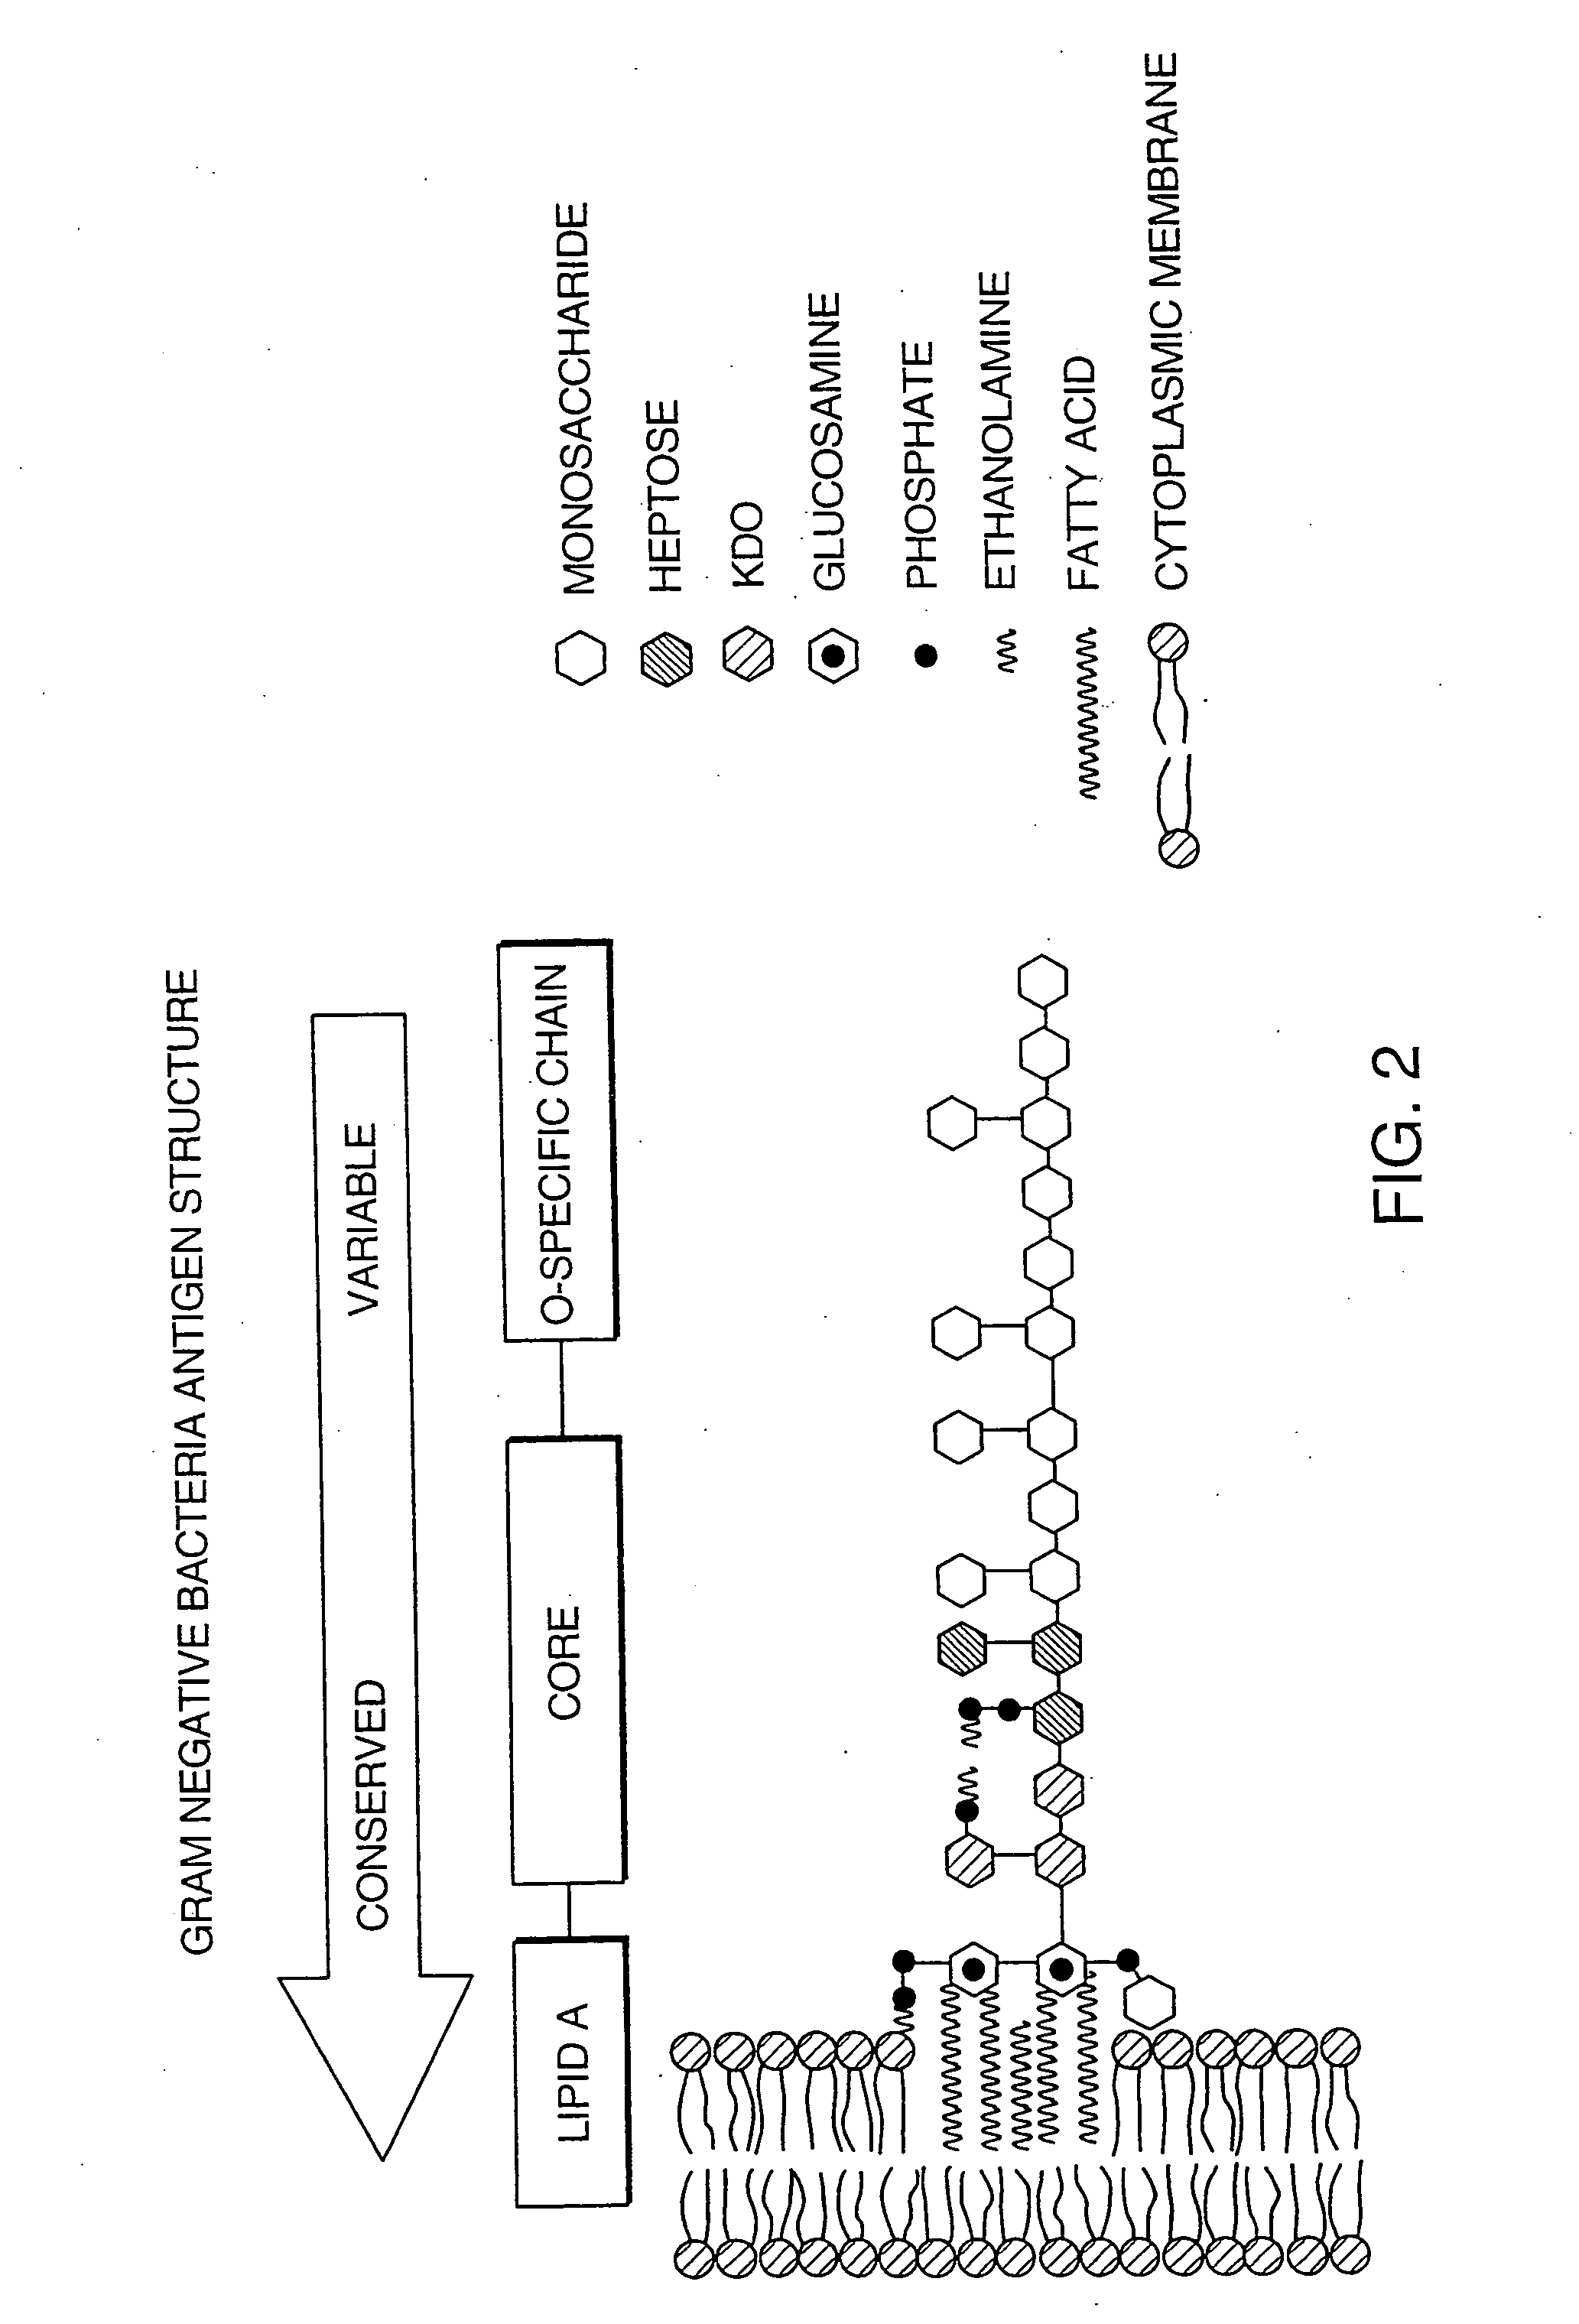 System for detecting bacteria in blood, blood products, and fluids of tissues